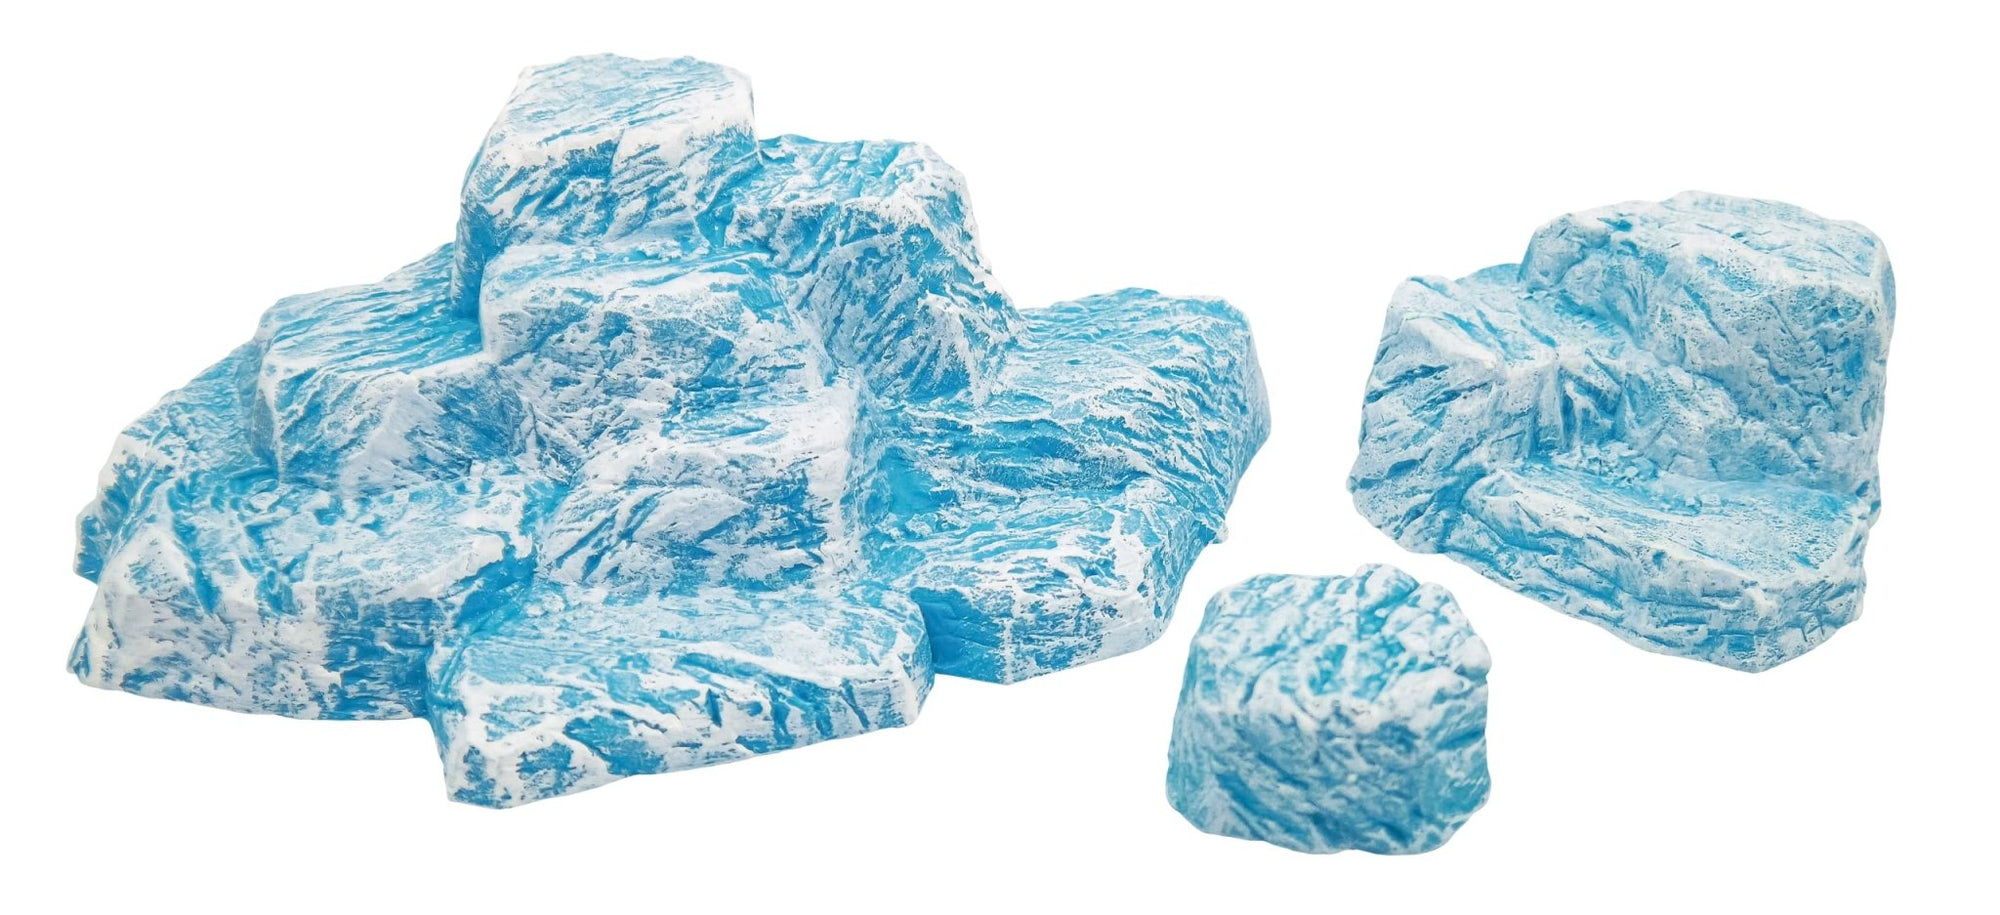 Monster Fight Club Monster Scenery: Snowy Hills - Lost City Toys